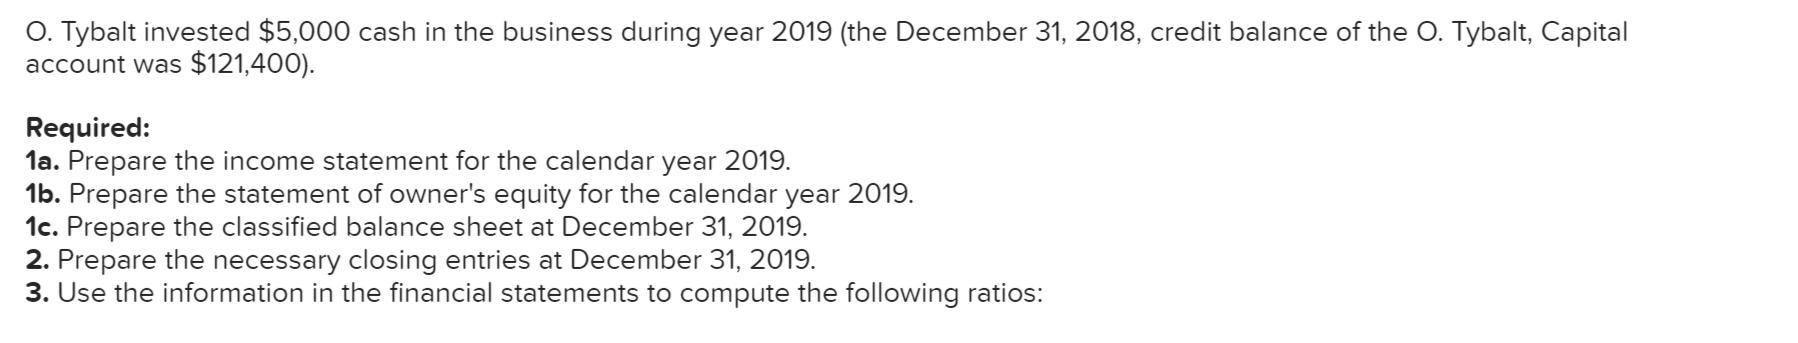 O. Tybalt invested $5,000 cash in the business during year 2019 (the December 31, 2018, credit balance of the O. Tybalt, Capi